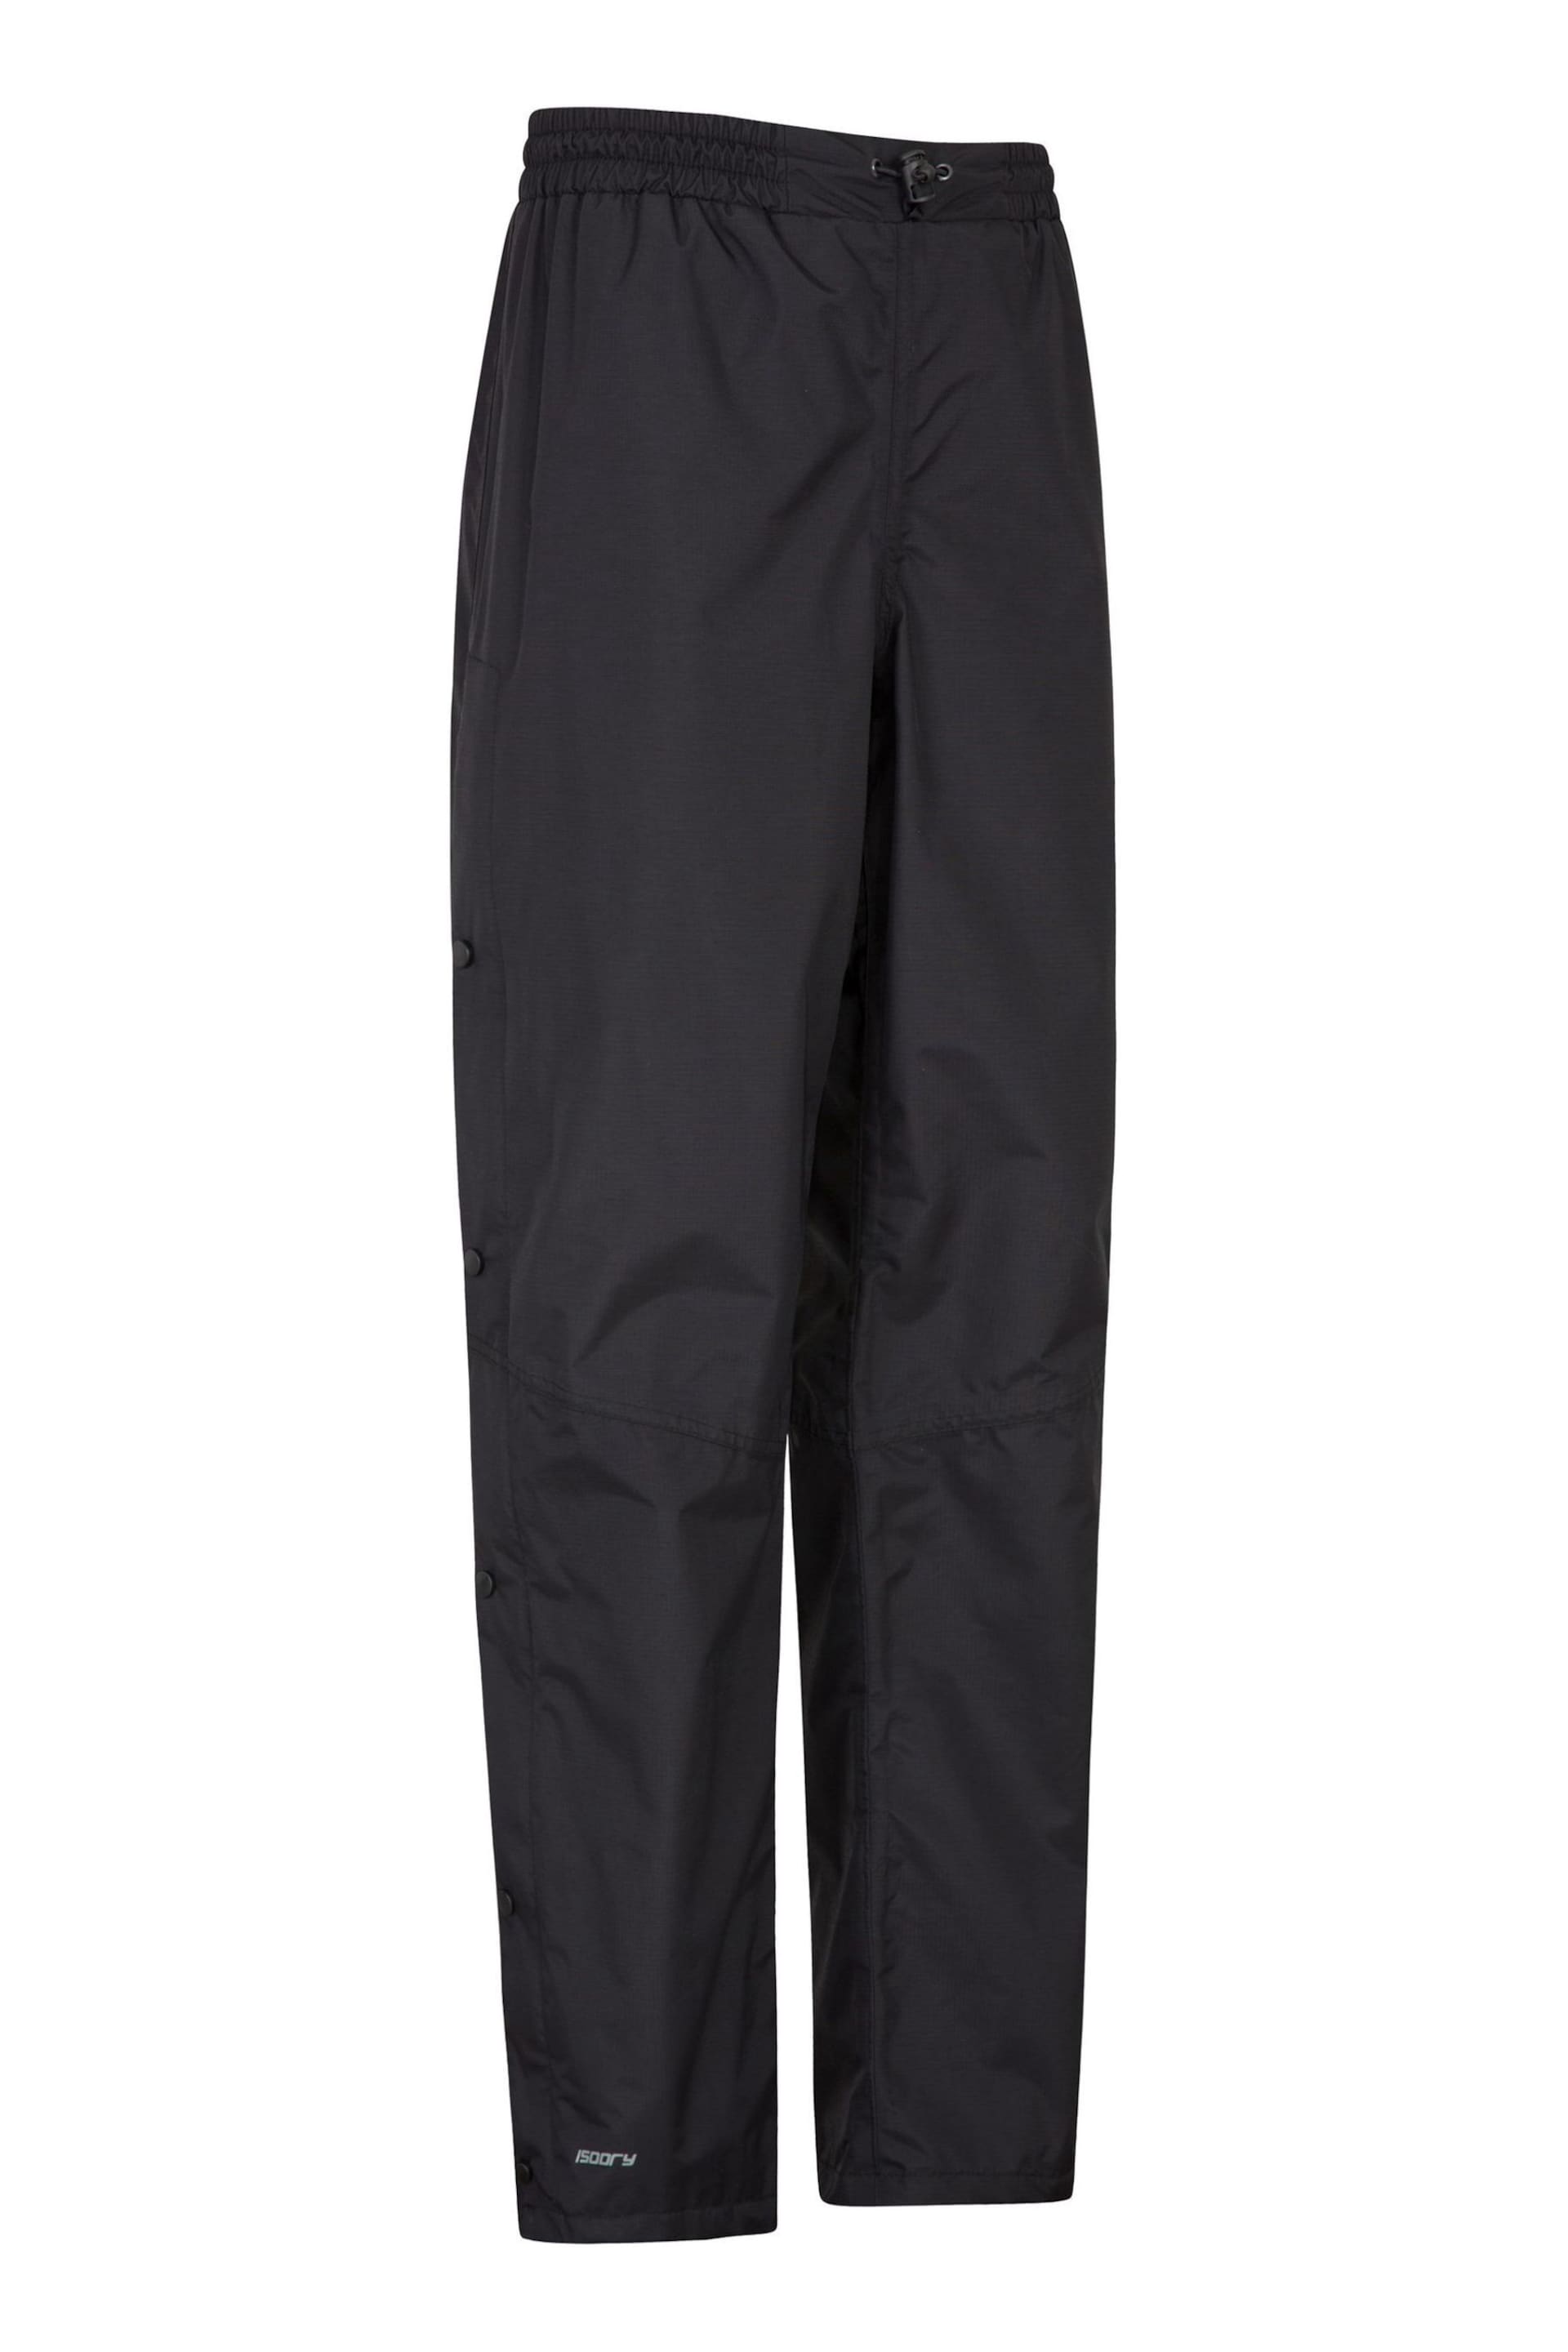 Mountain Warehouse Black Downpour Womens Short Length Waterproof Trousers - Image 2 of 5